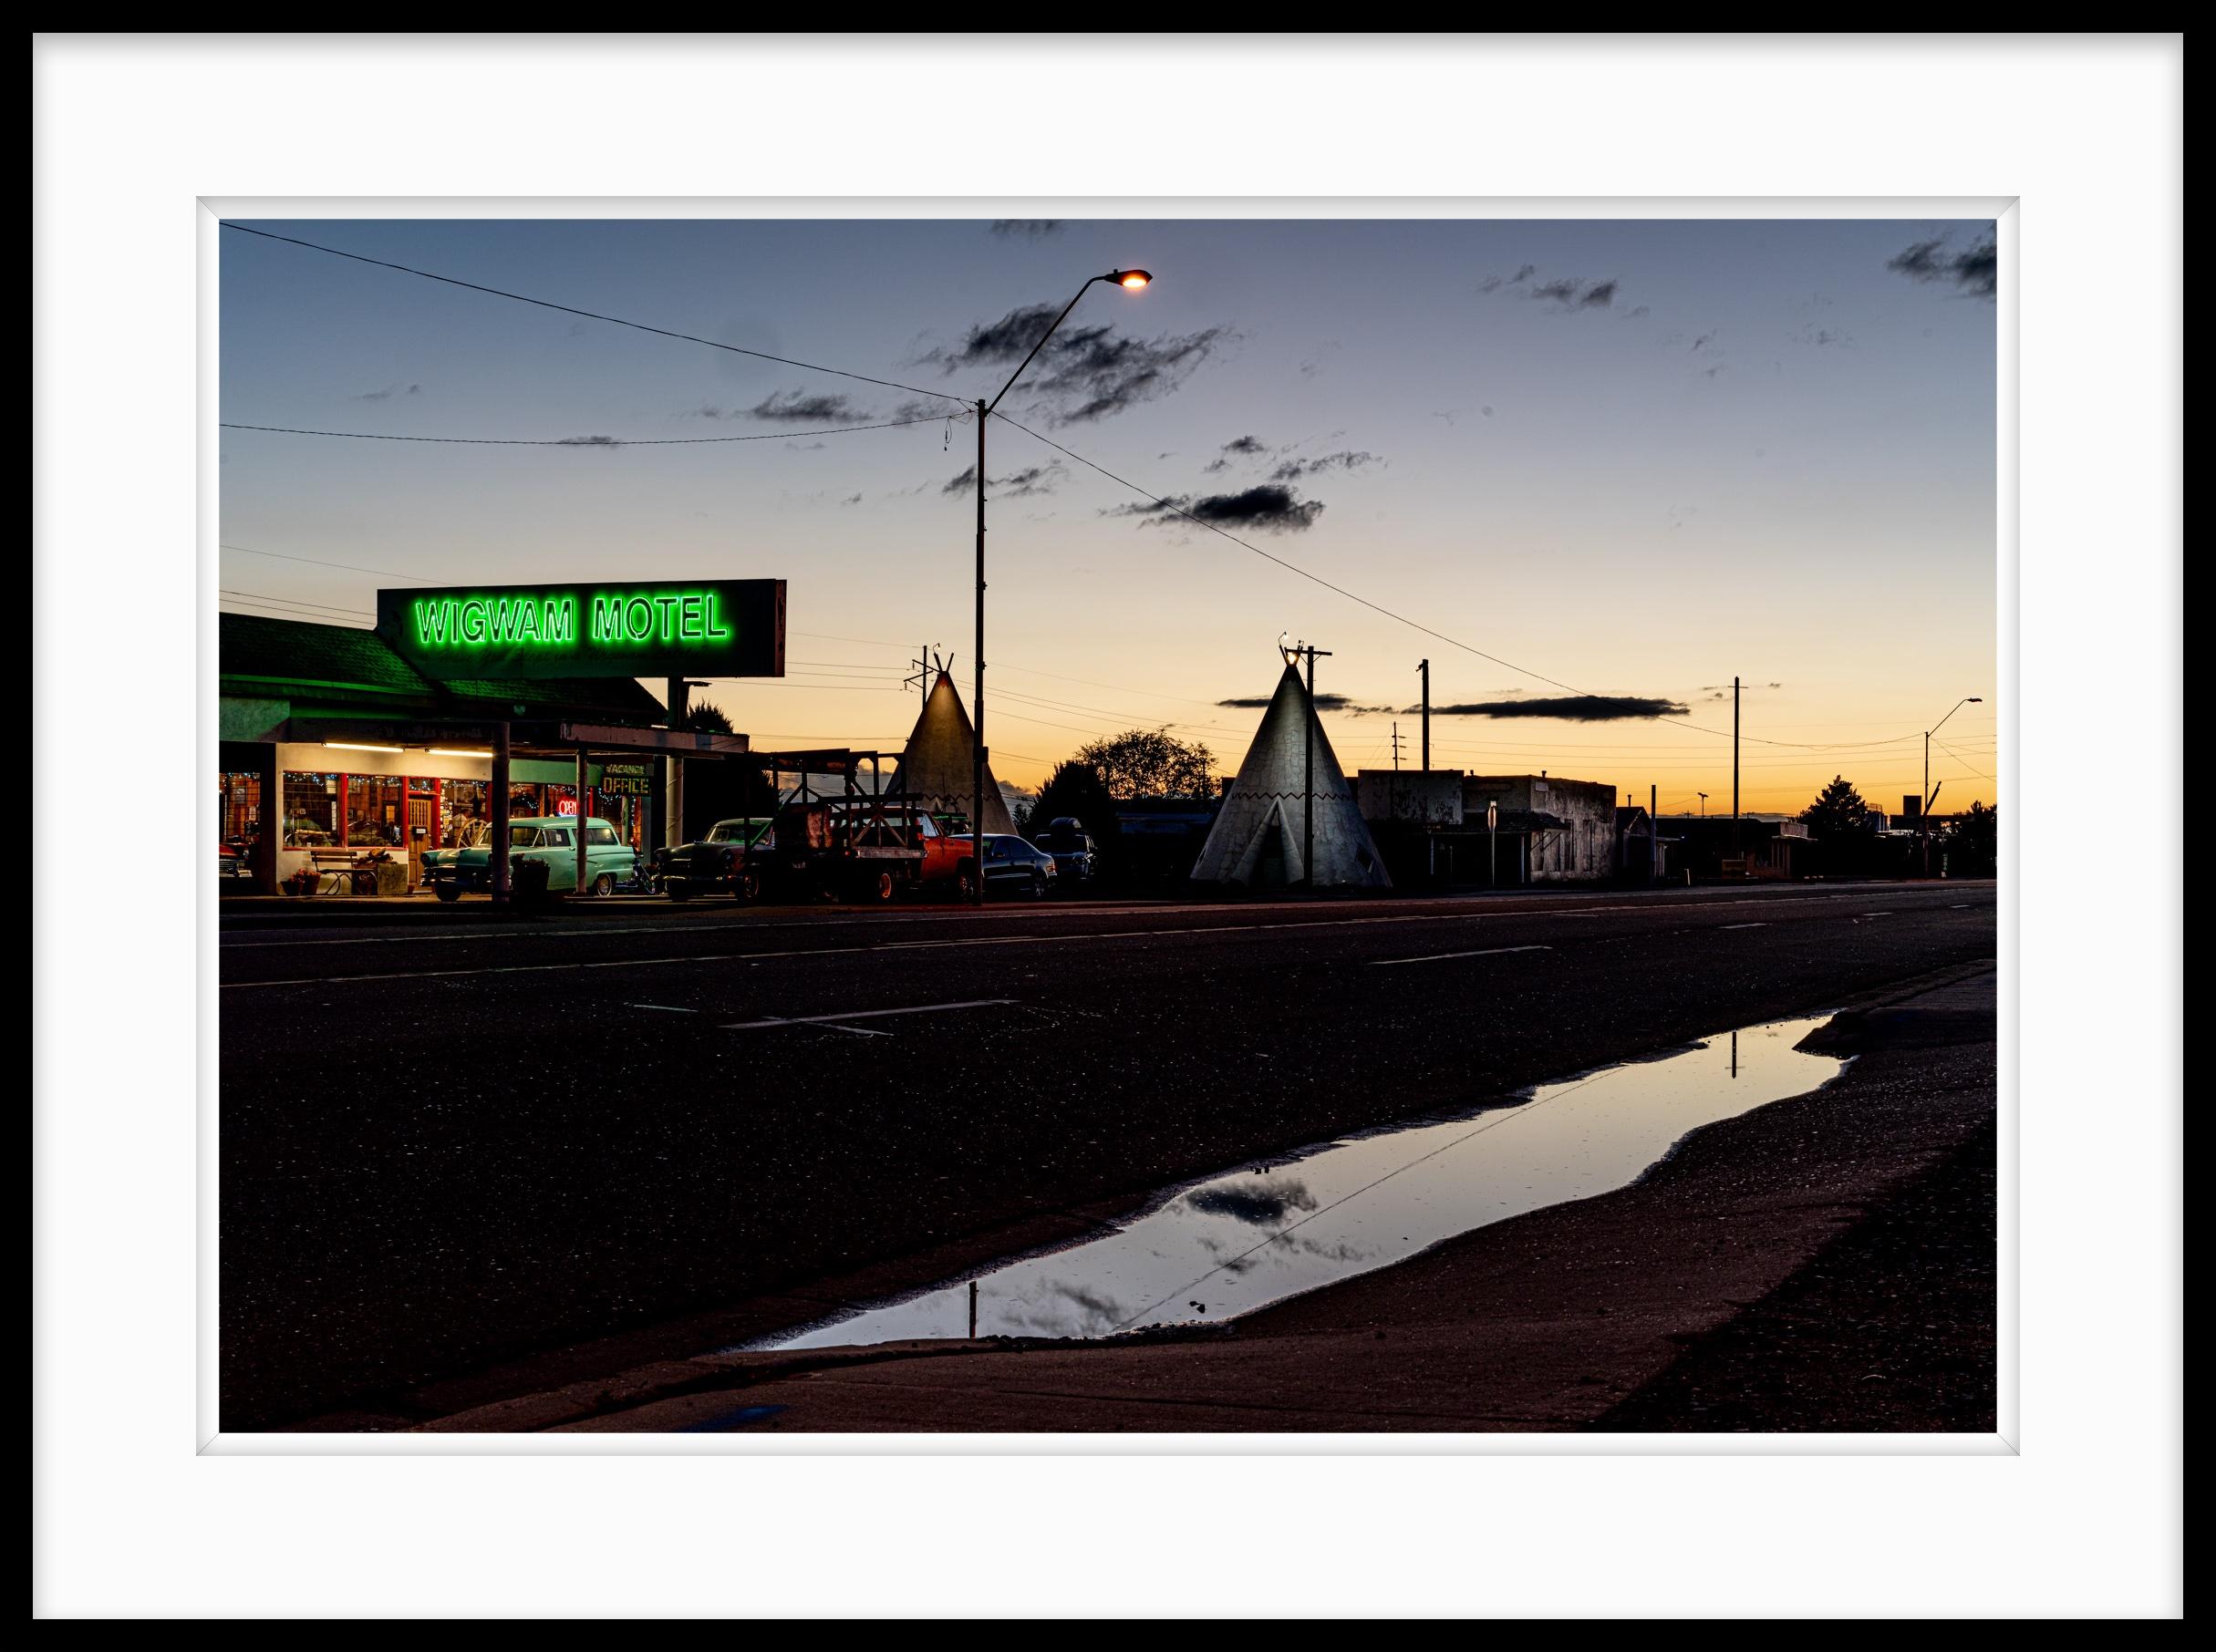 Limited Edition Color Photograph Rt. 66  Iconic Neon. I was on a long photographic exploration road trip through the American West and I happened along this Rt. 66 icon just after sunset and and a light rain.

About:
Lewis’ artistic practice often